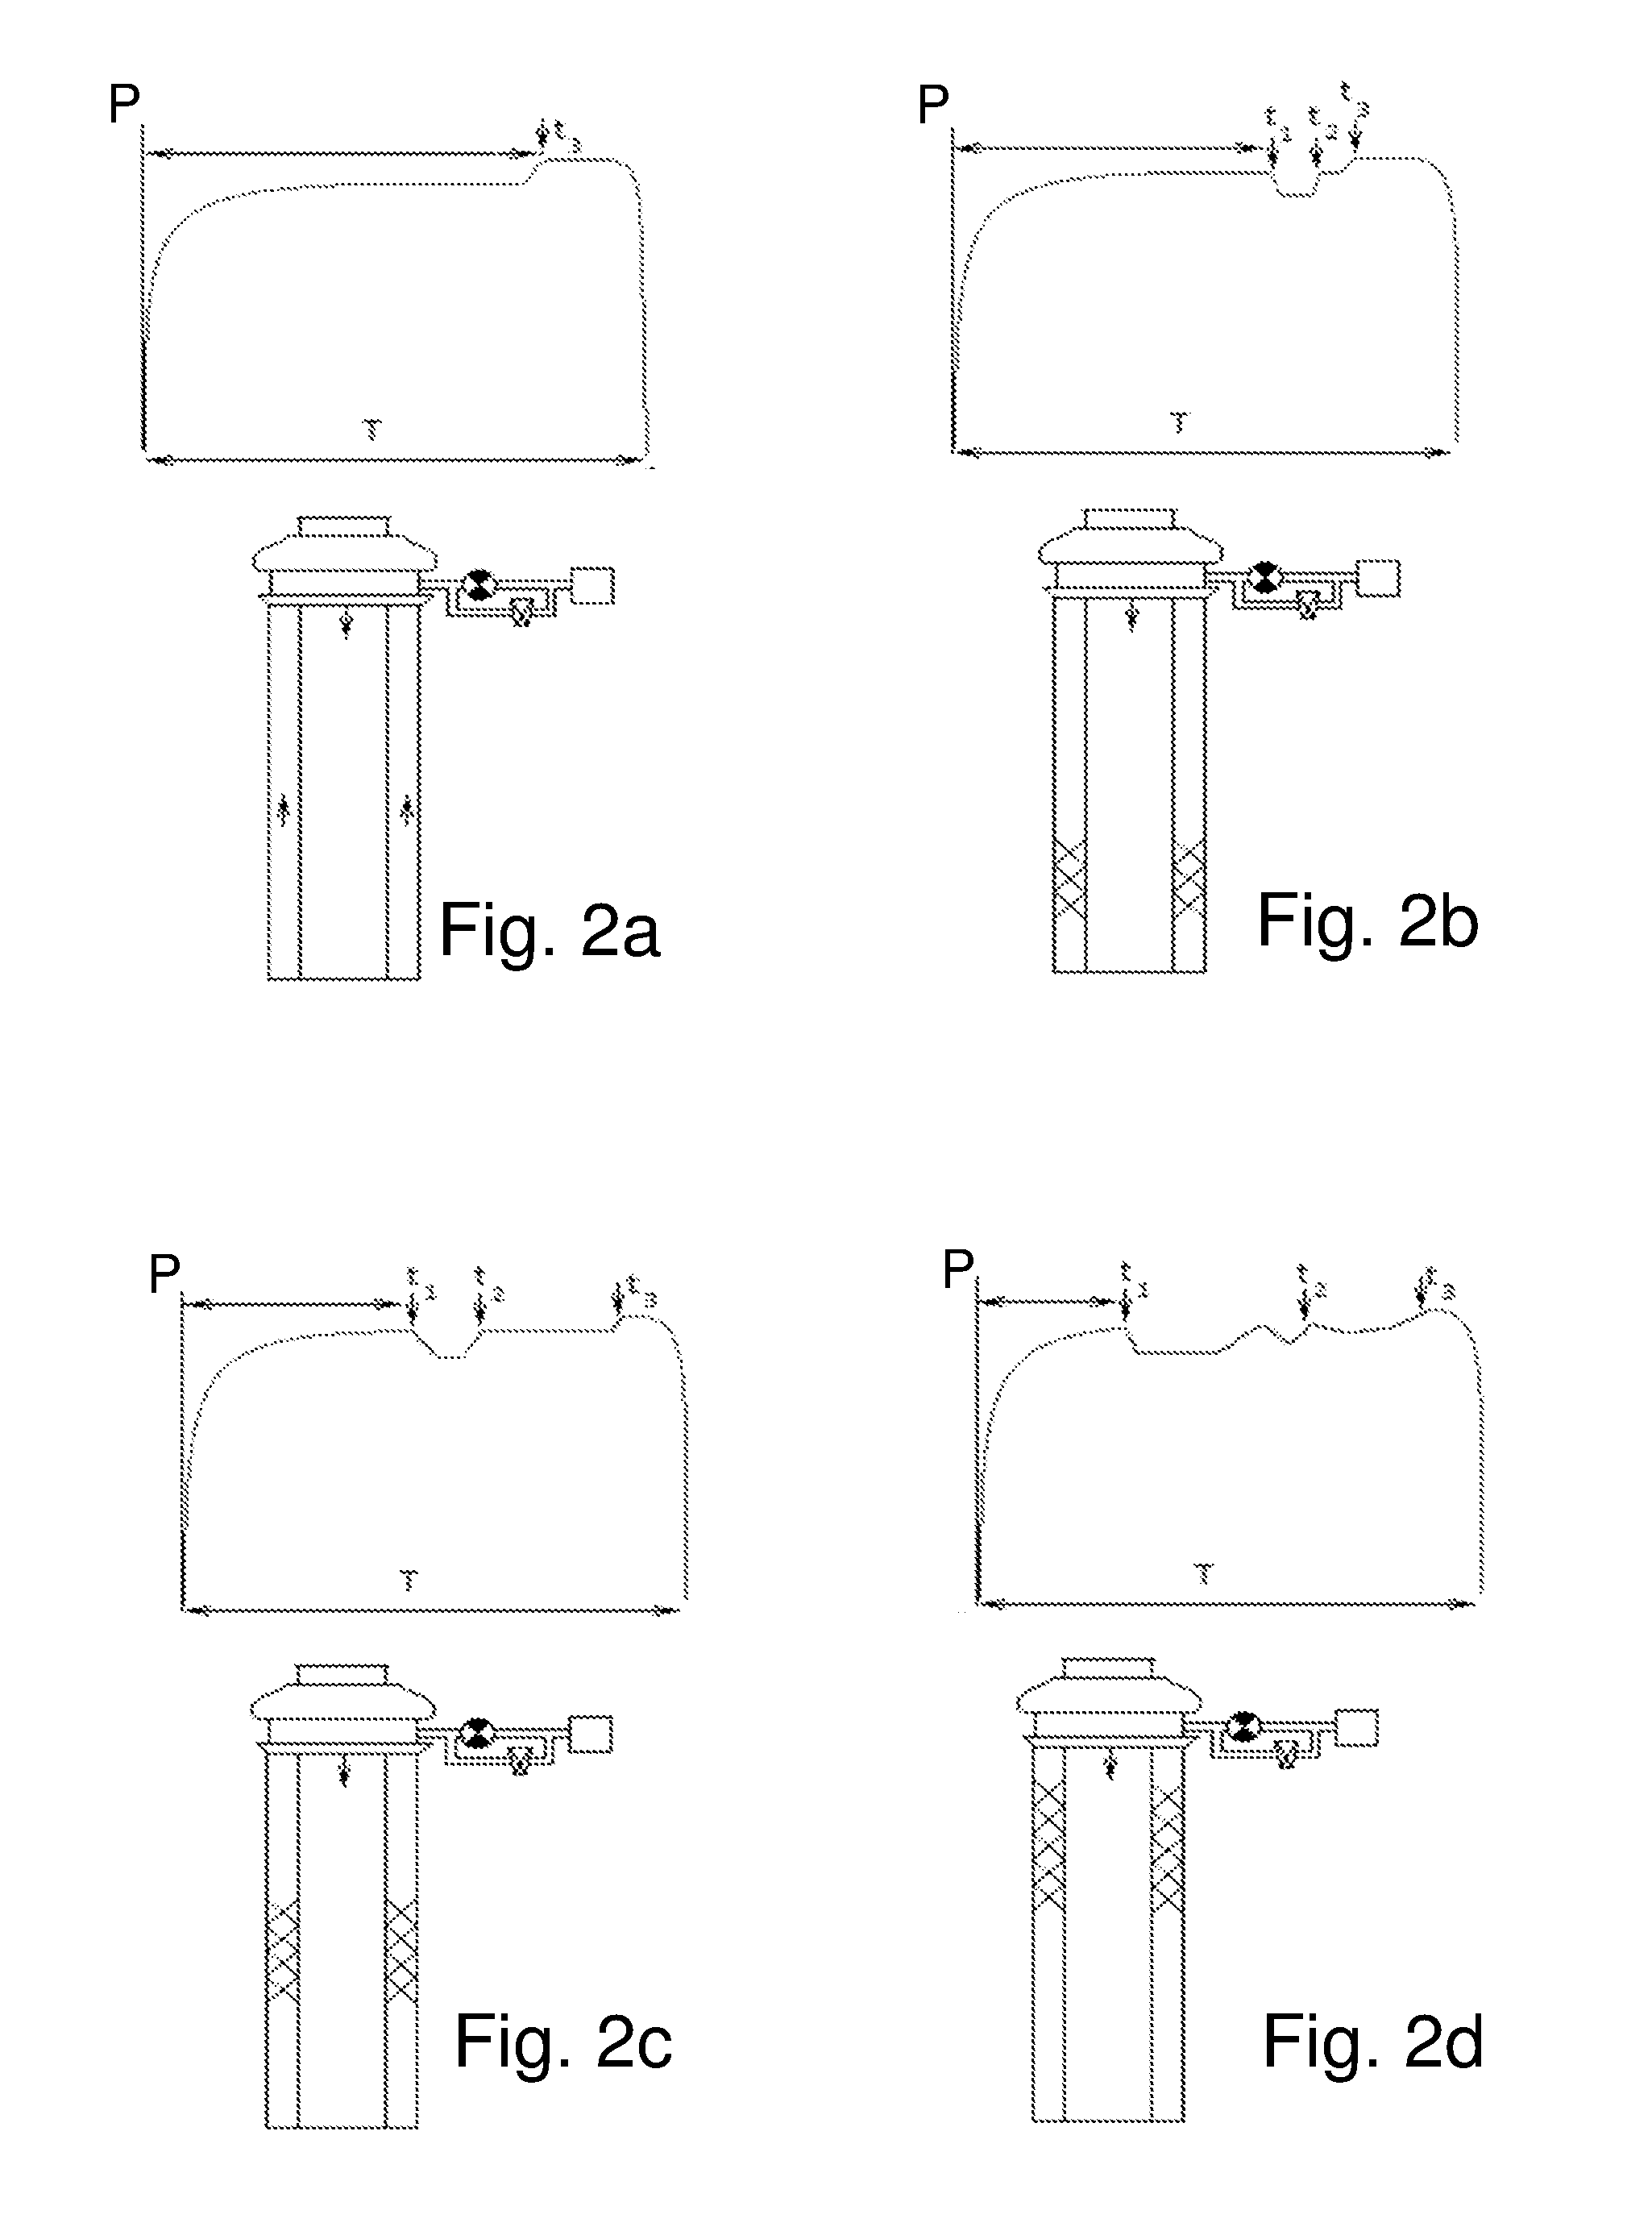 Acoustic Methods and Devices for Determining the Value of Formation Overpressure During Drilling and for Detecting Gas Packs Containing Hydrogen Sulfide Gas